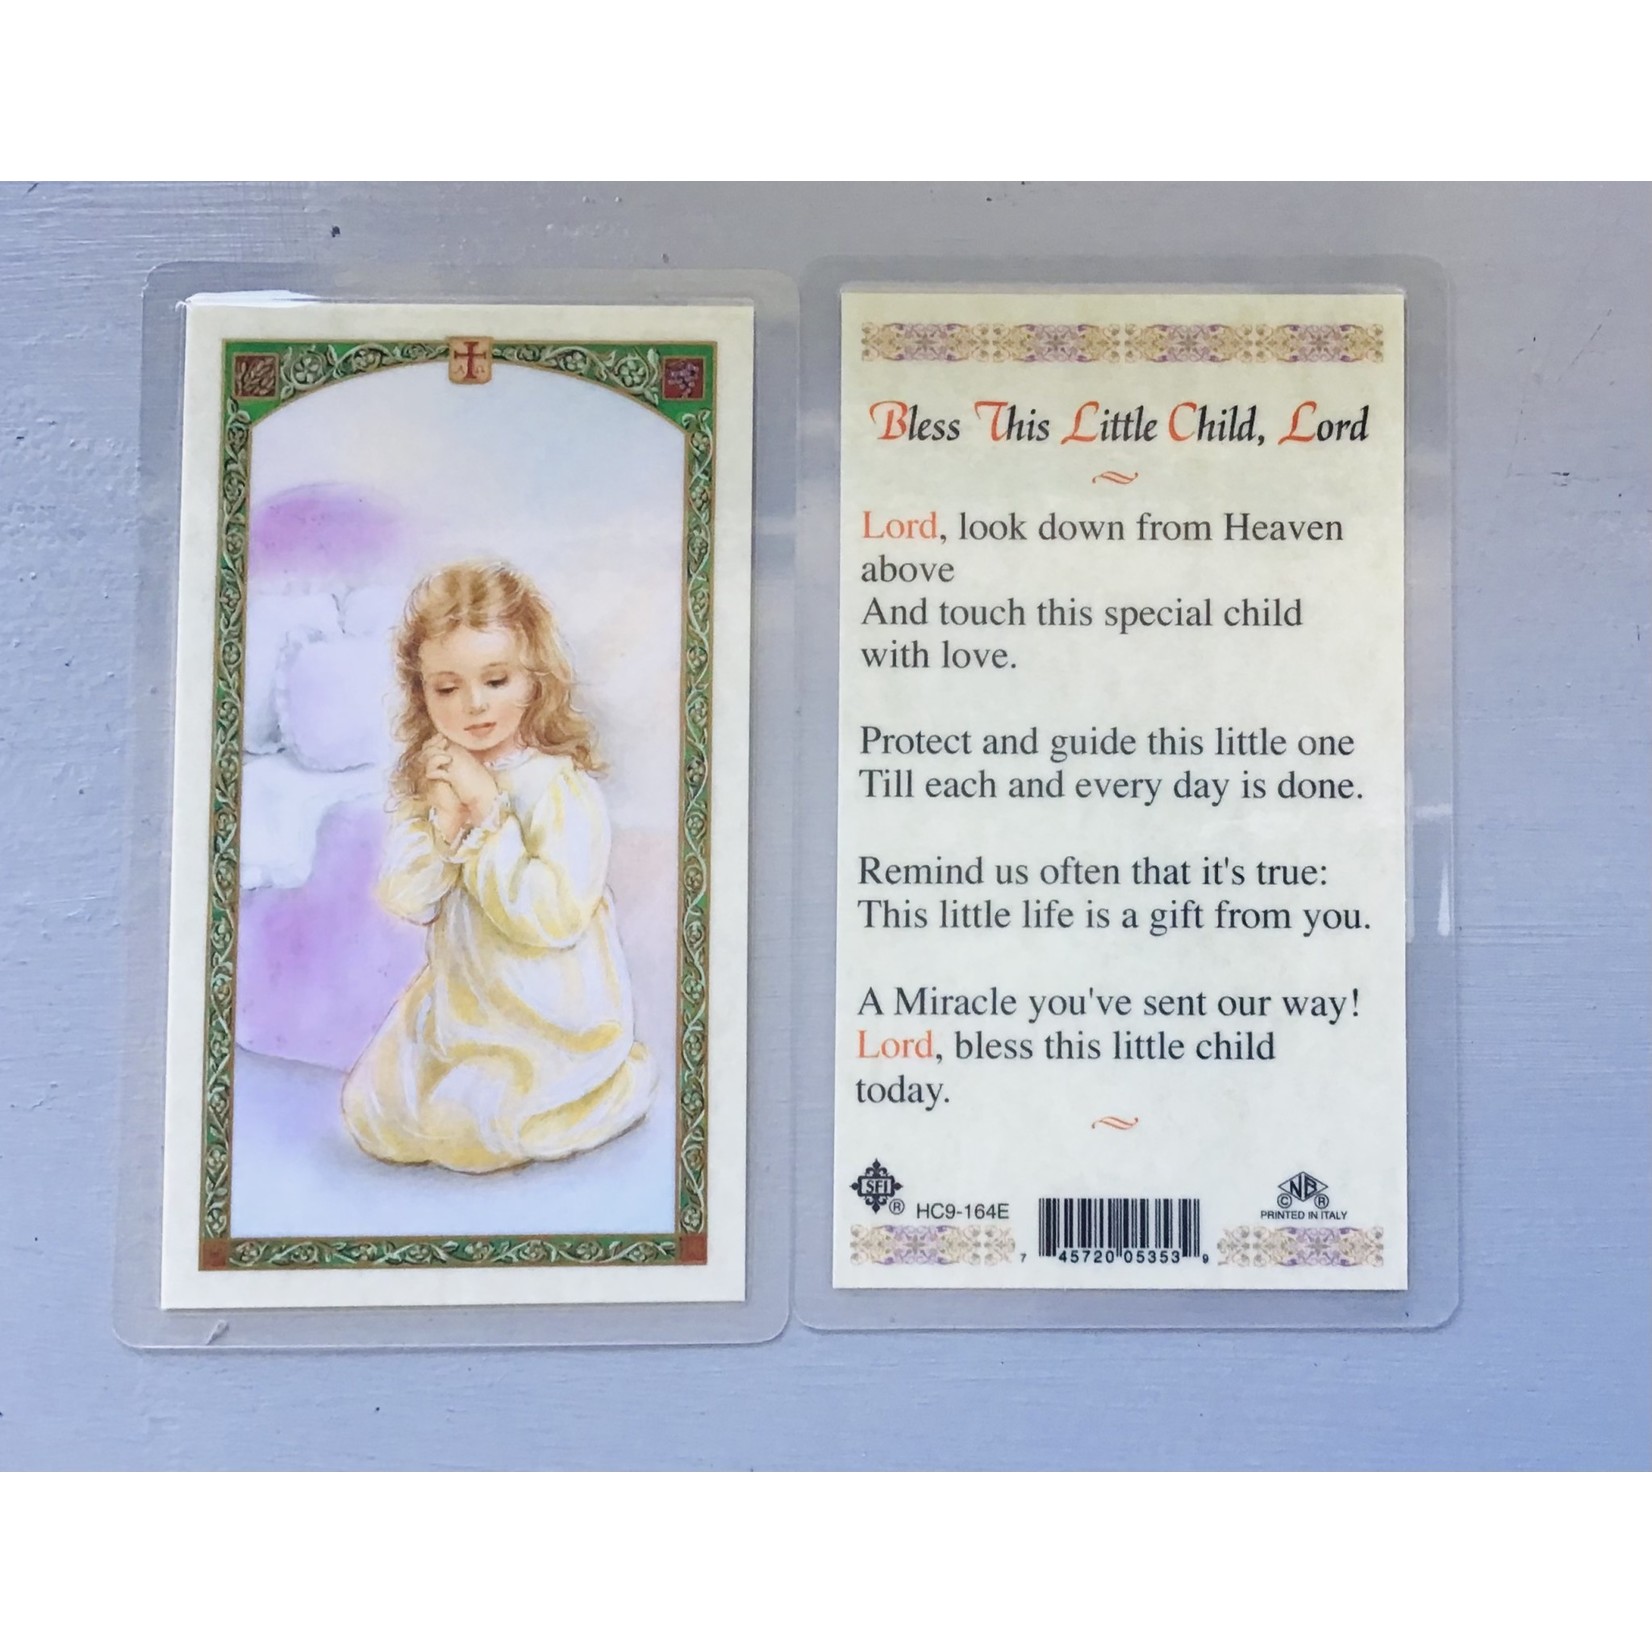 Prayer Card Bless This Little Child, Lord